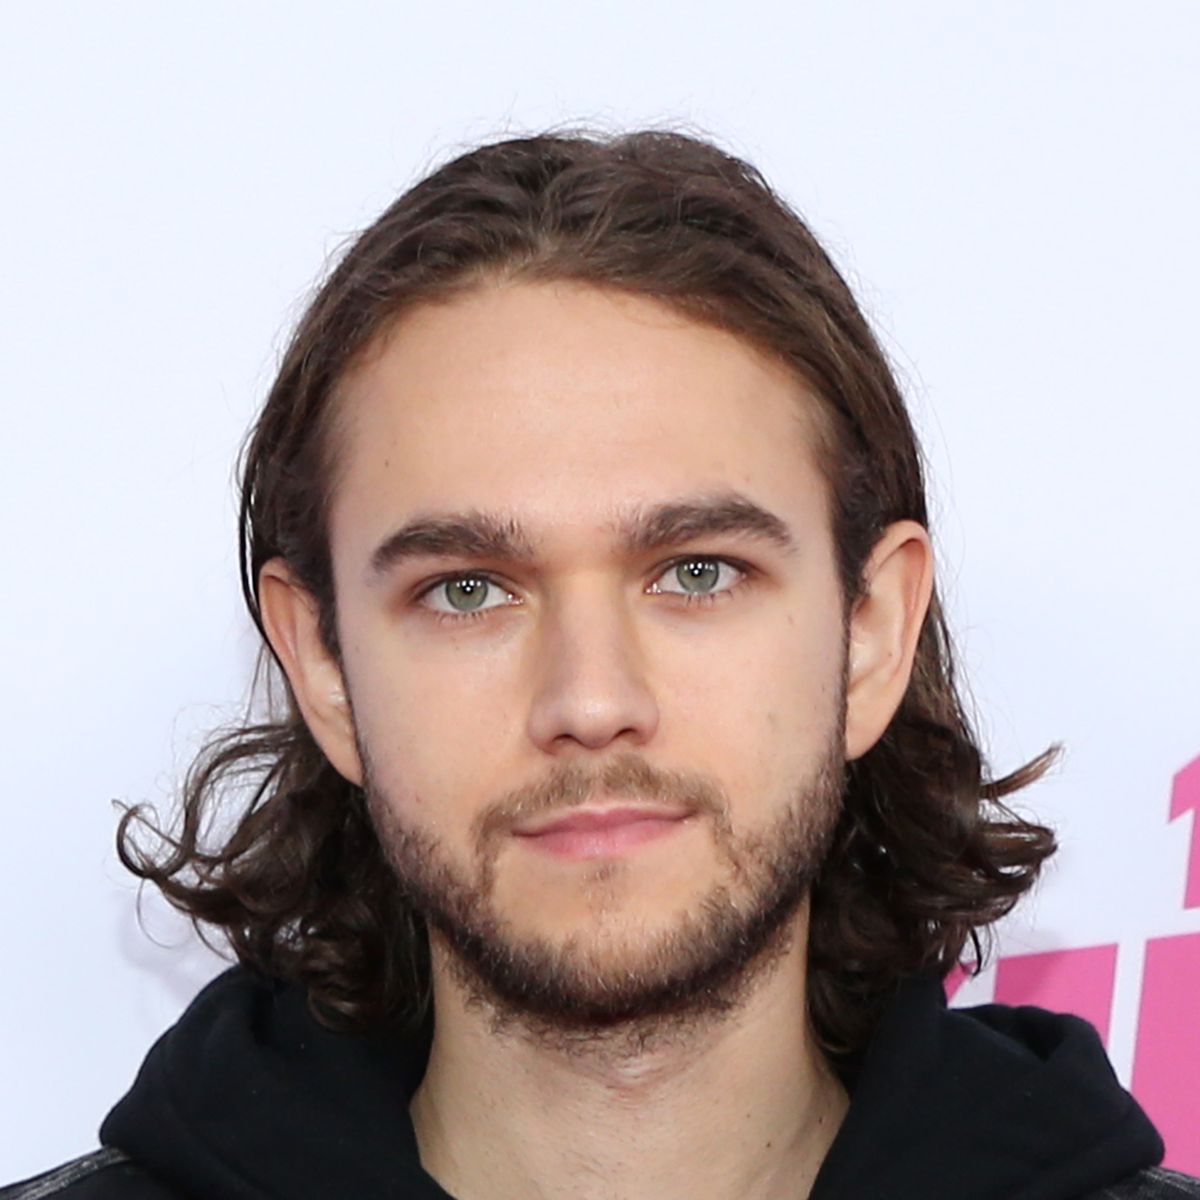 Dj Zedd Banned From China After South Park Tweet